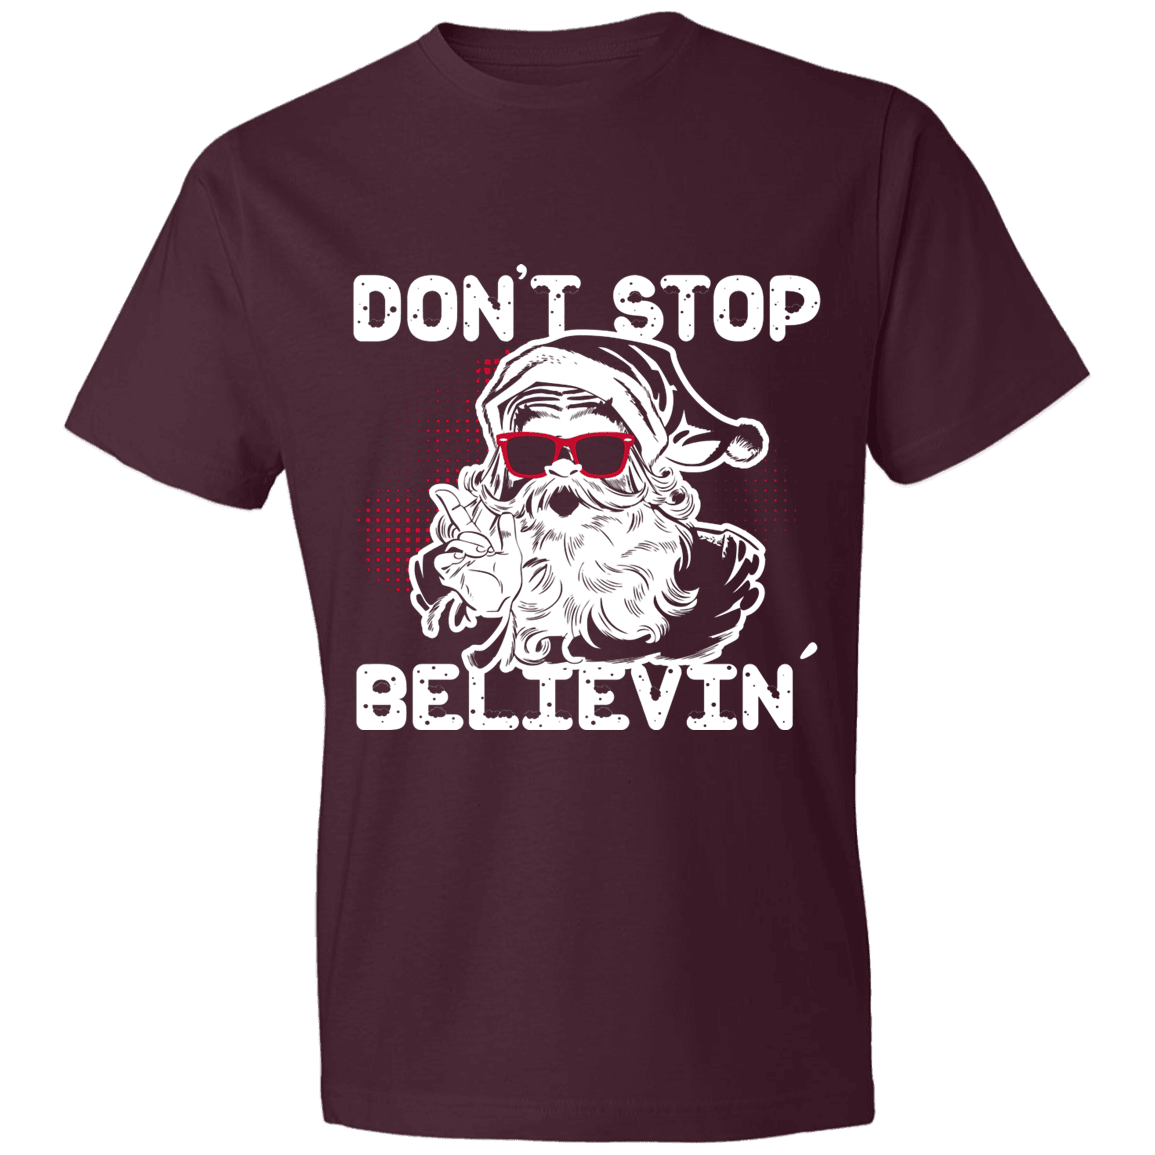 Designs by MyUtopia Shout Out:Don't Stop Believin - Lightweight Unisex T-Shirt,Maroon / S,Adult Unisex T-Shirt